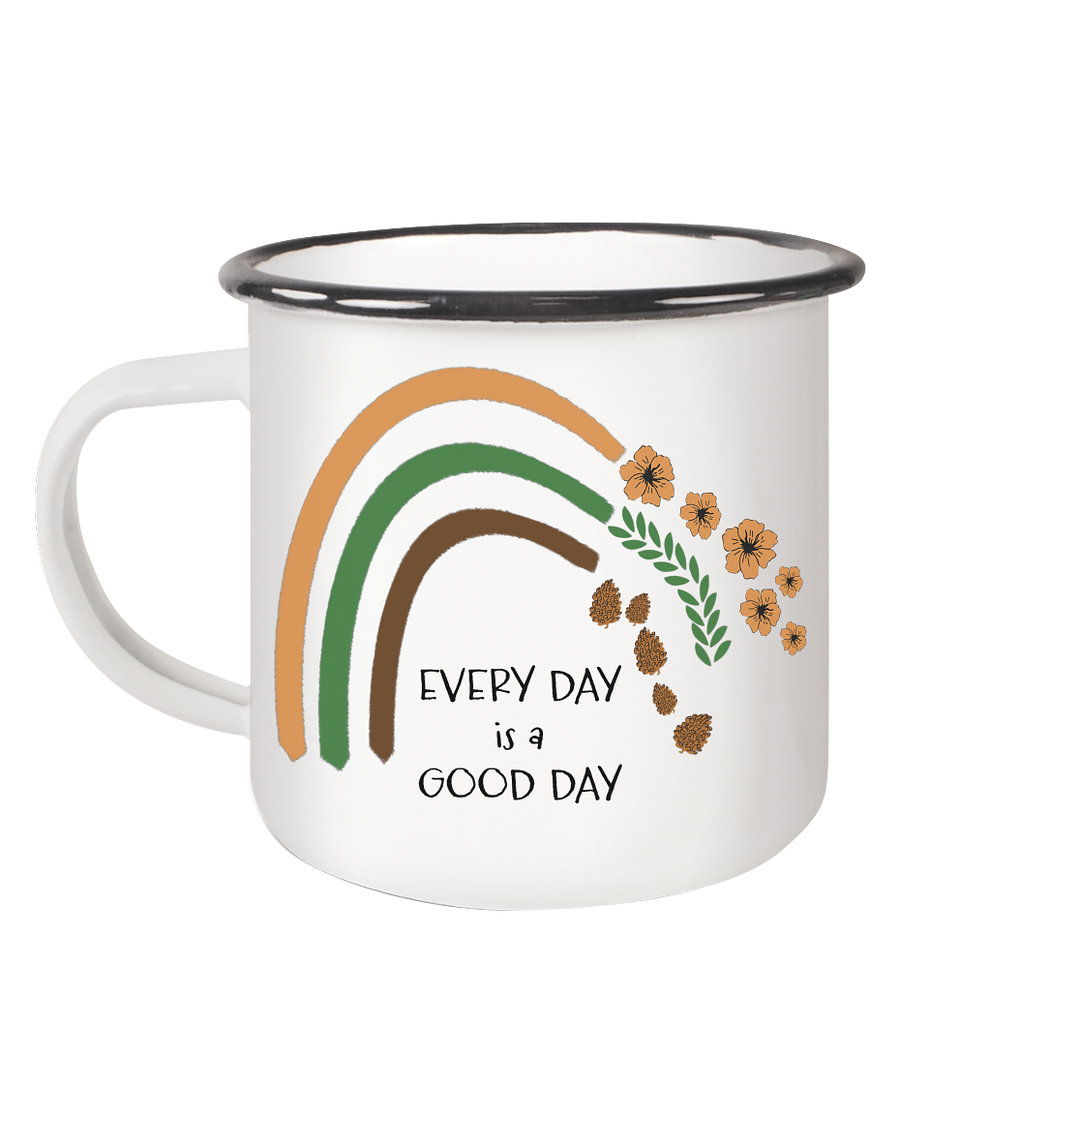 EVERY DAY IS A GOOD DAY - Emaille Tasse